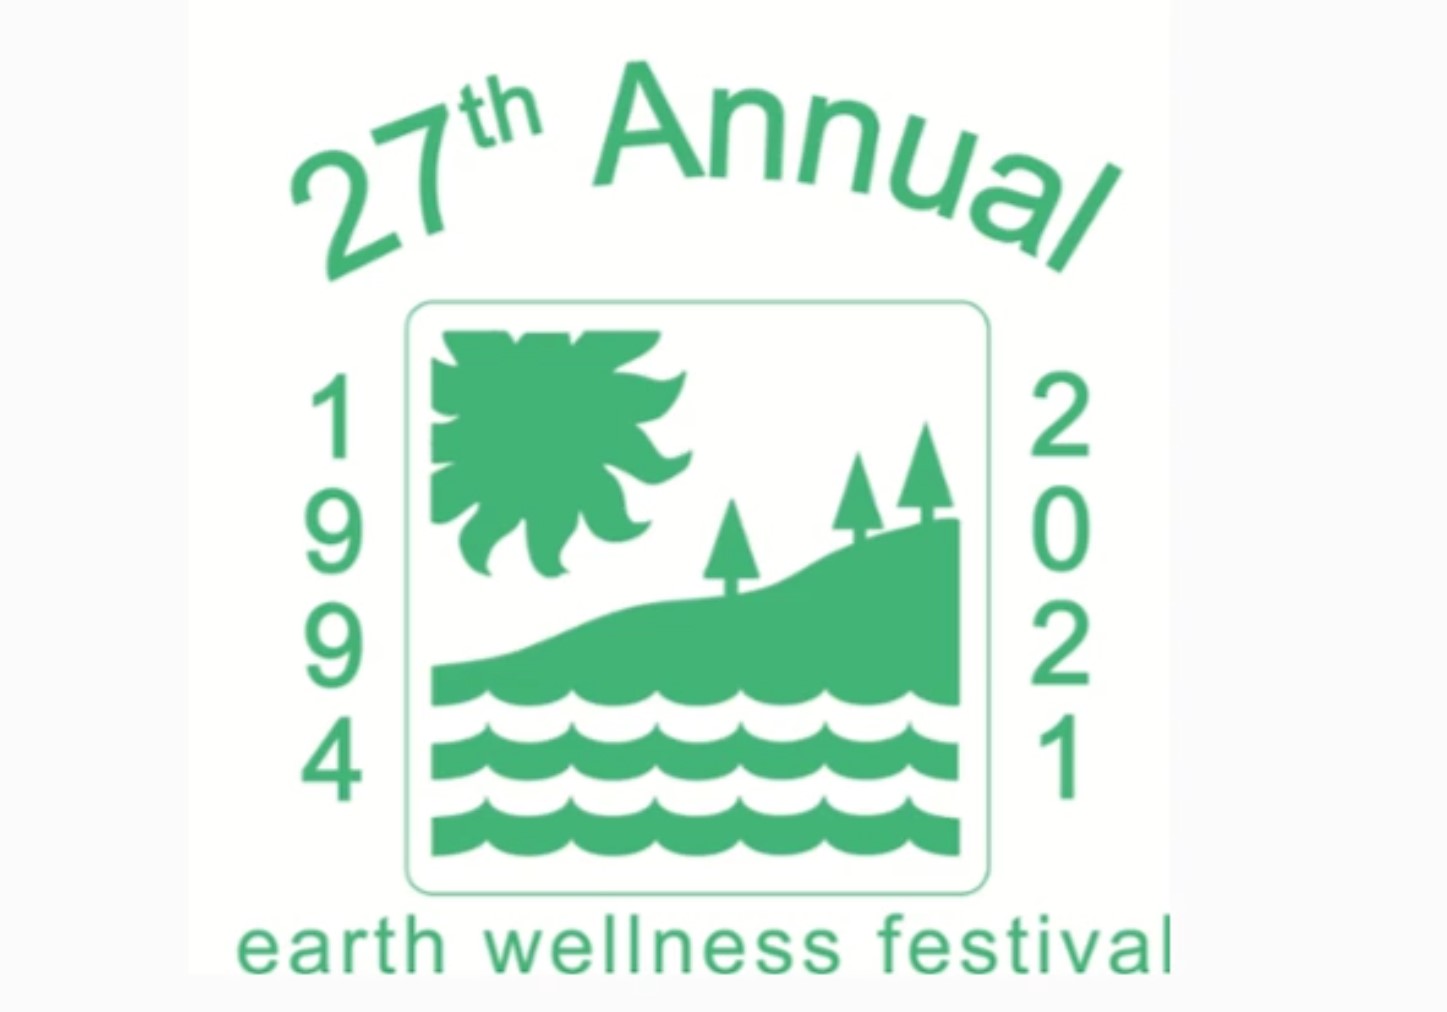 Welcome to the 2021 earth wellness festival!